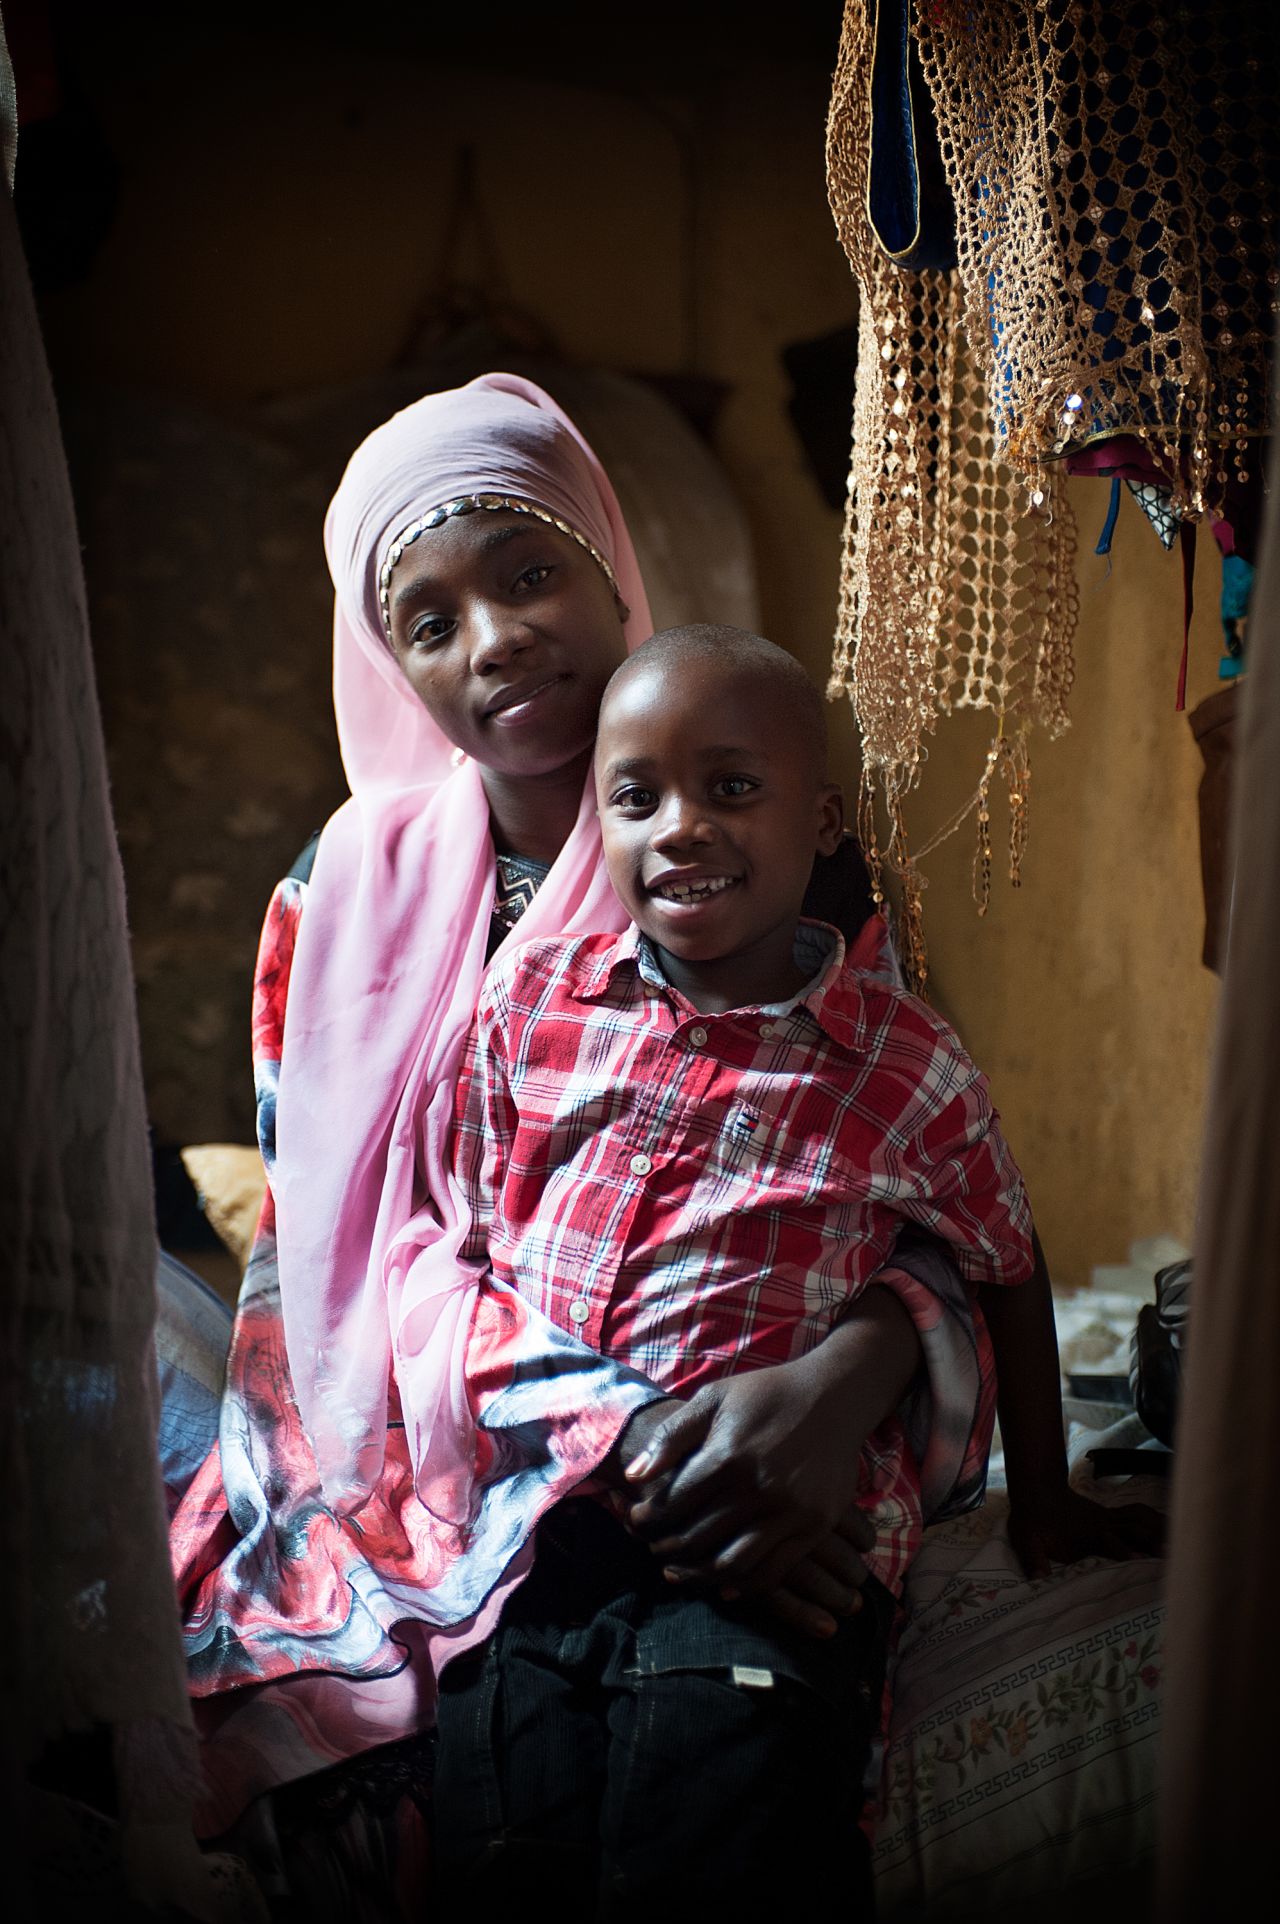 Hethiri and his mother live in a small room in a slum in the Kawempe division of Kampala. He was finally diagnosed with TB thanks to the help of a local village health worker who was part of the city's SPARK-TB program.